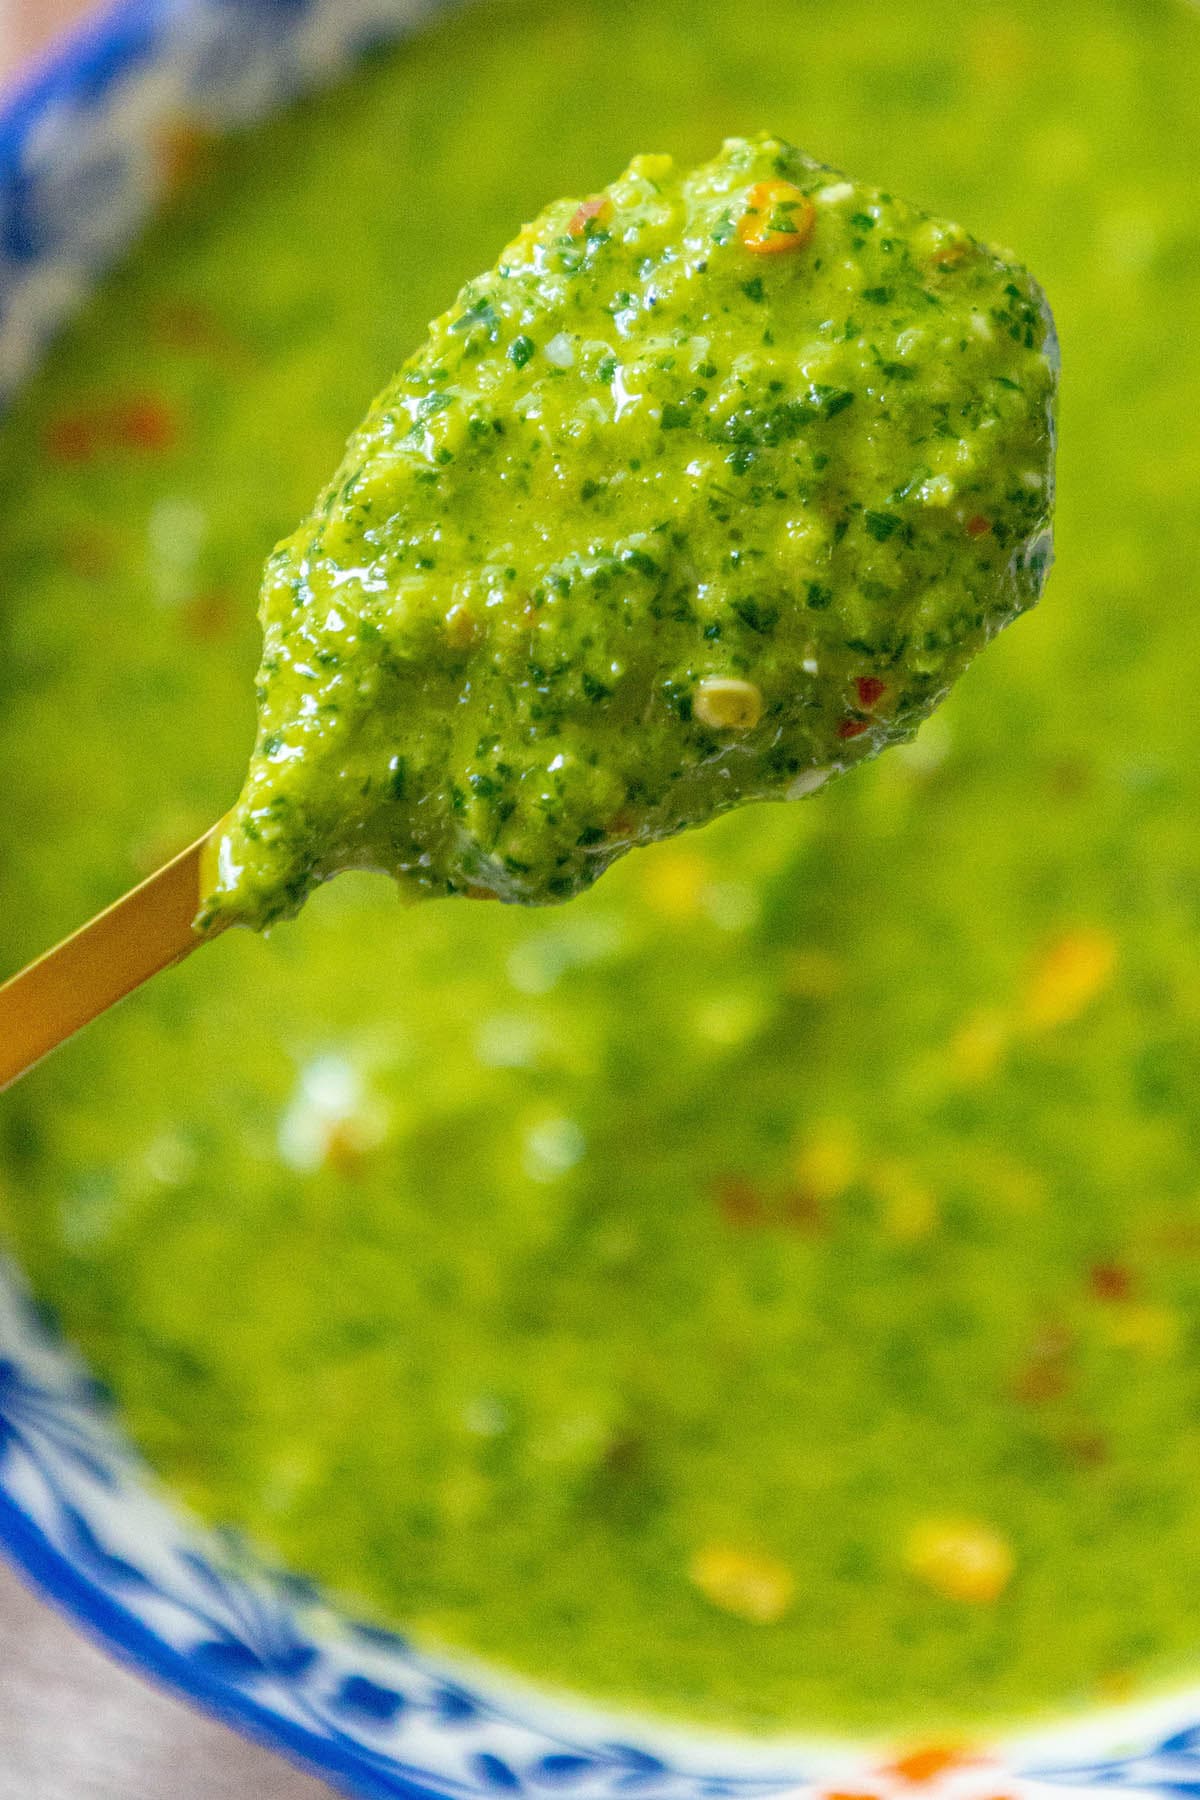 bright green zhoug sauce with flecks of cilantro and red pepper flakes in a decorative blue mug